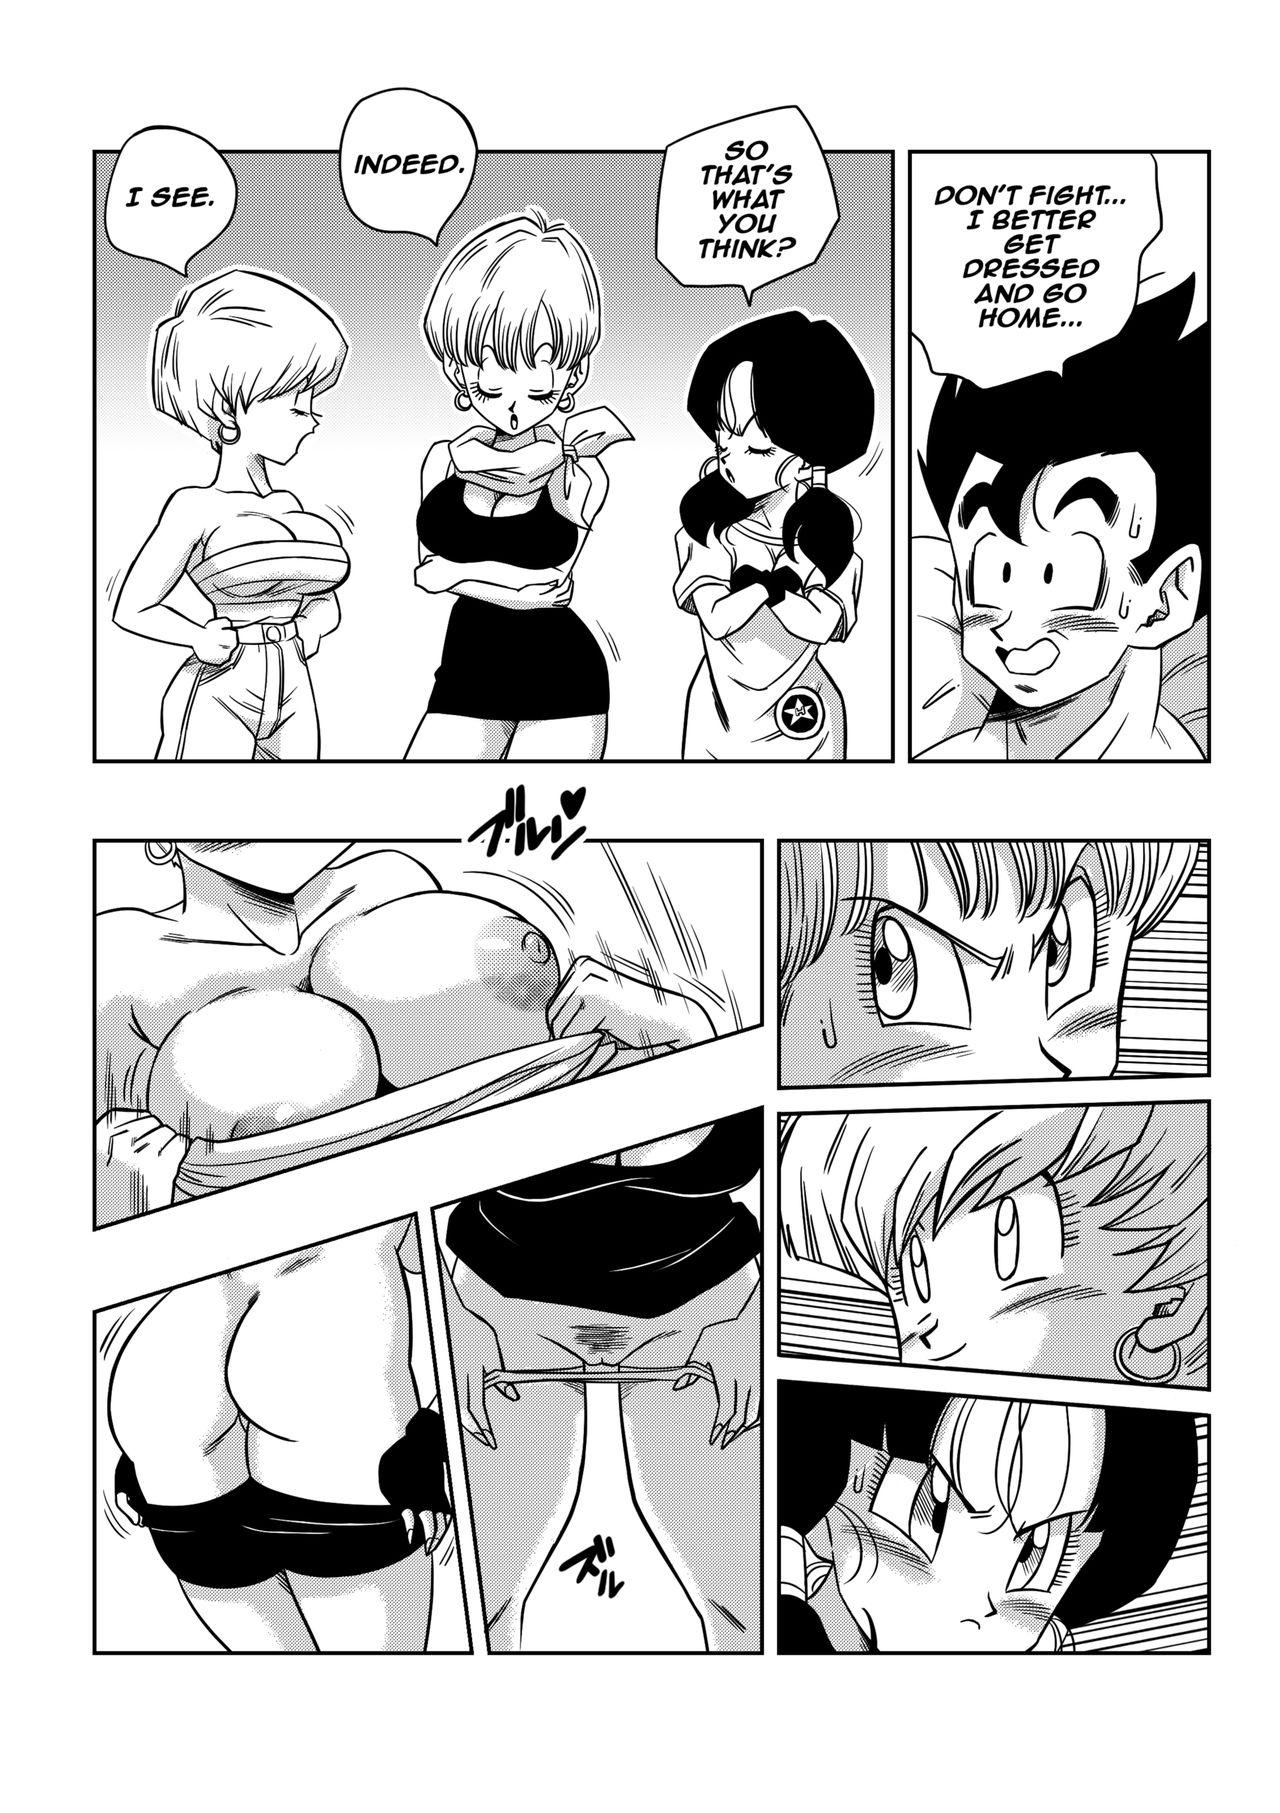 Big Pussy LOVE TRIANGLE Z - Part 4 - Dragon ball z Piercings - Page 10